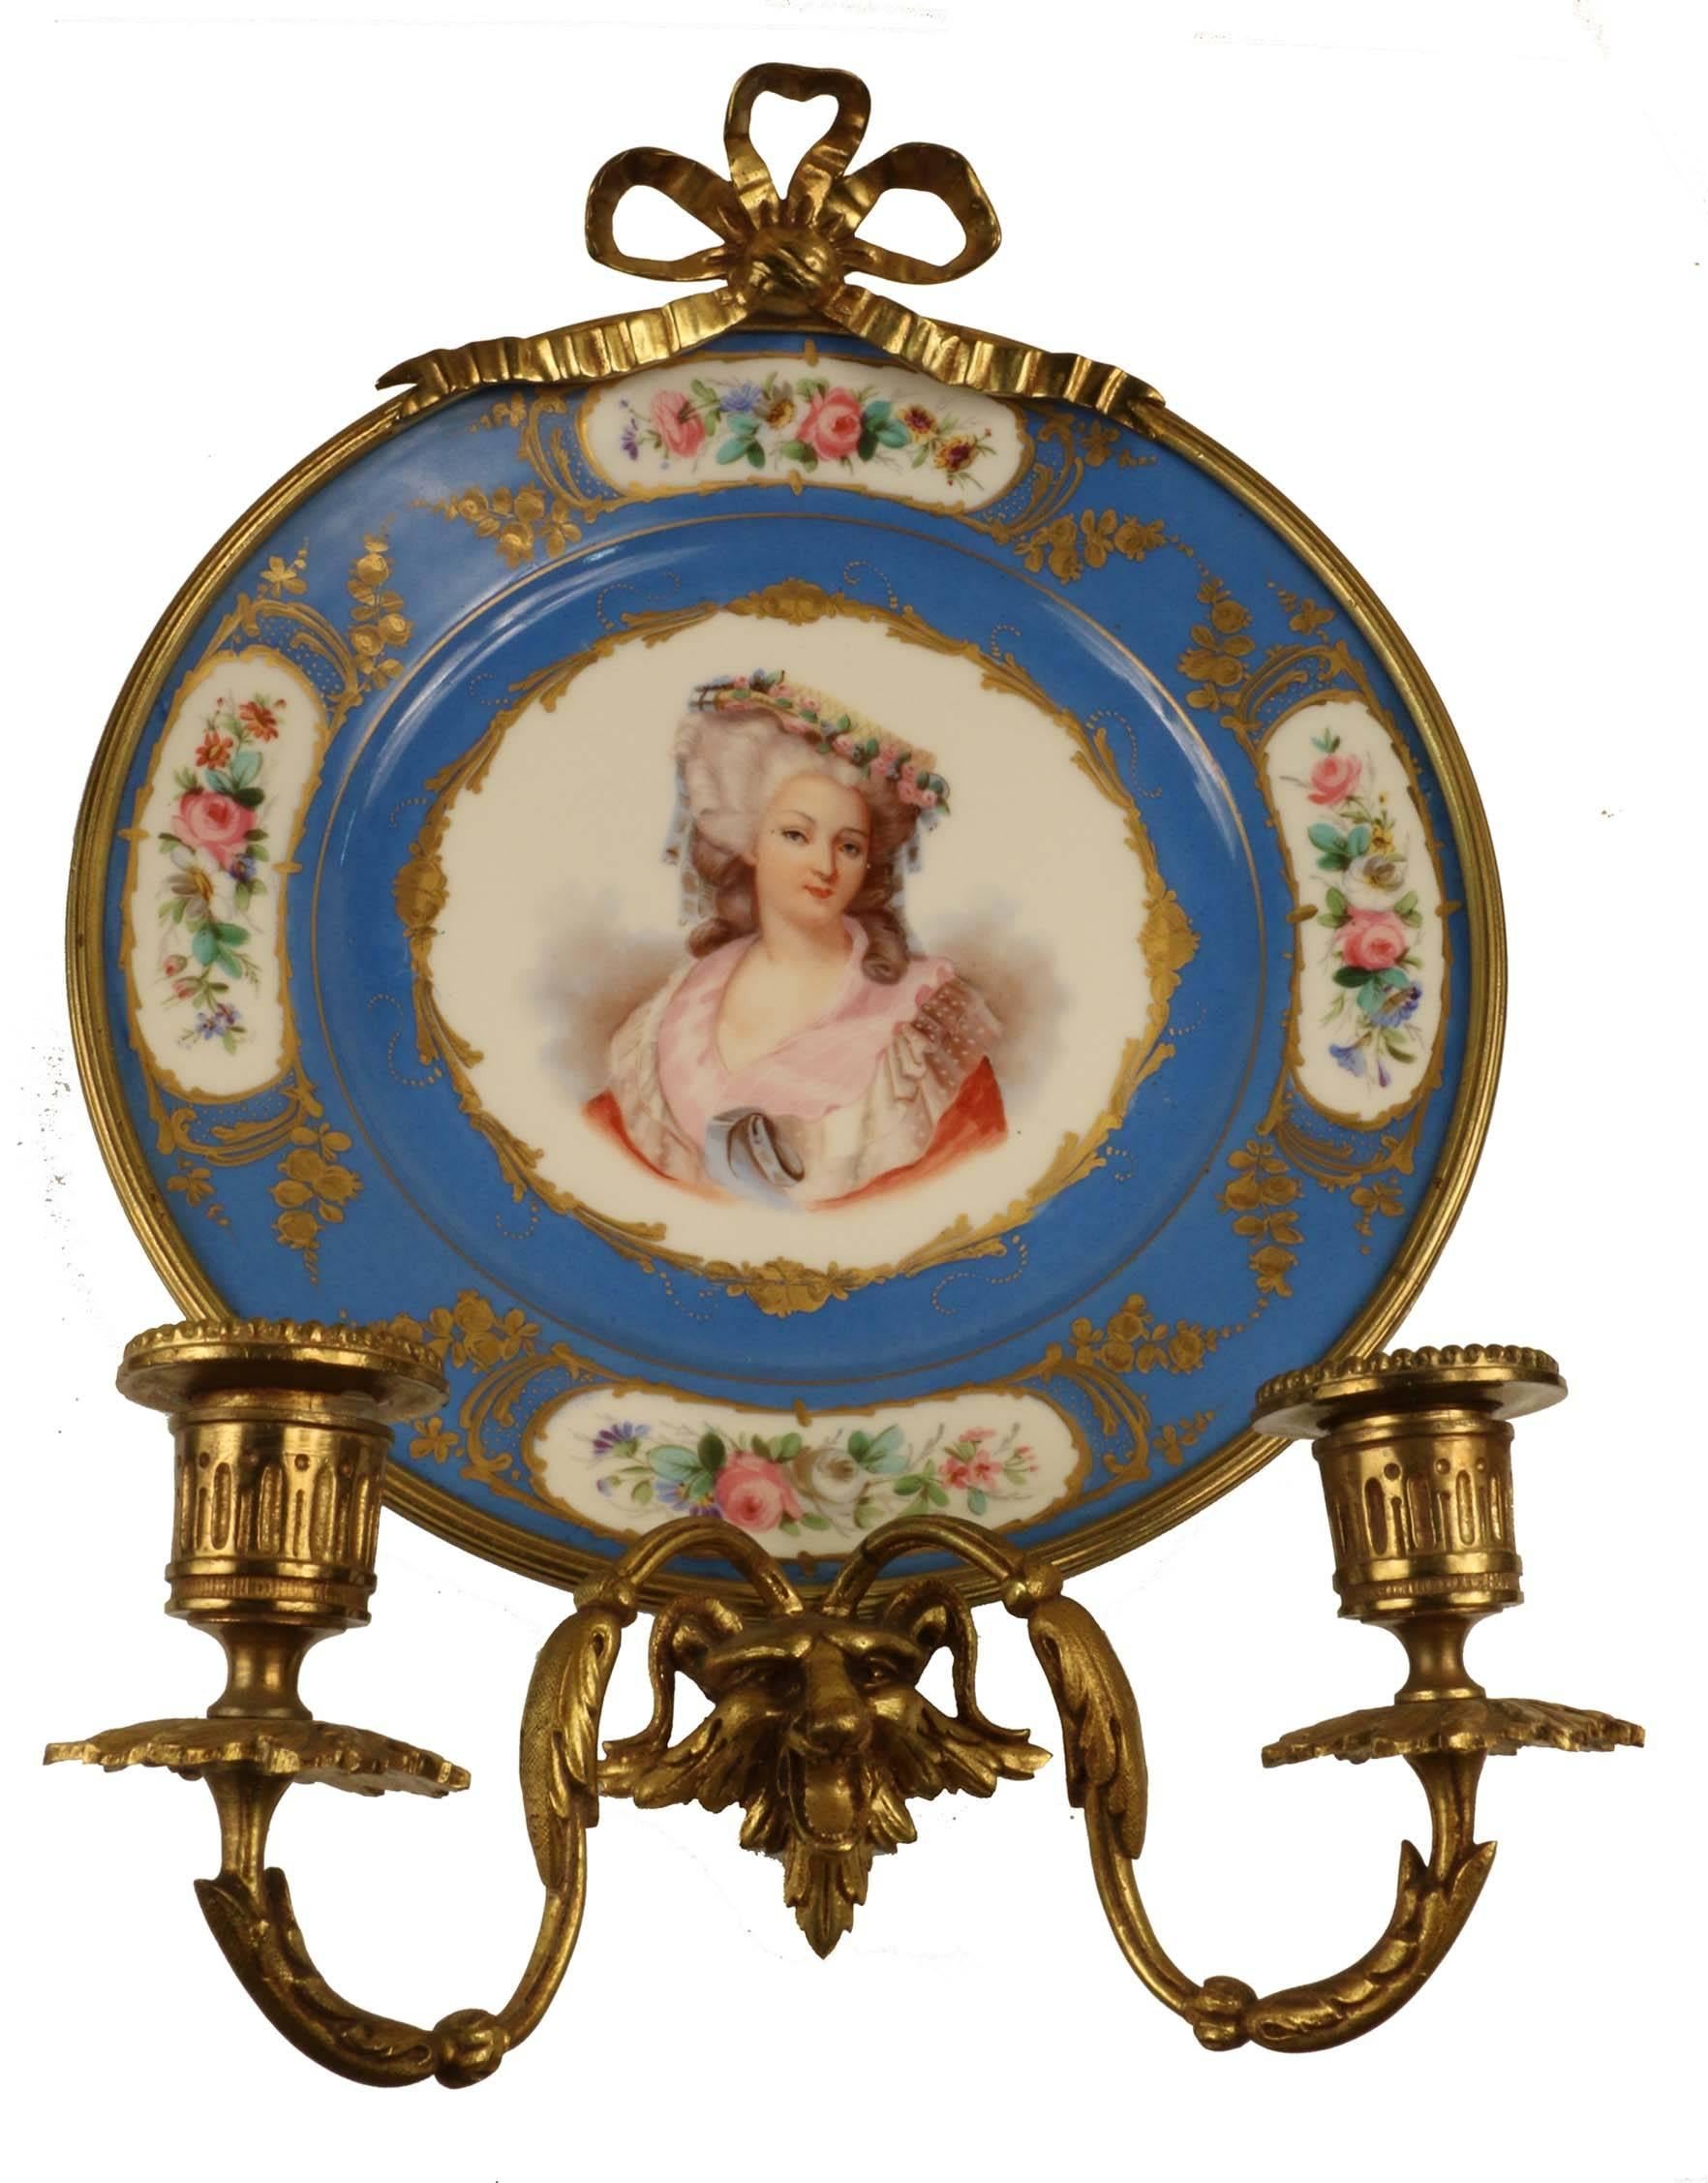 A pair of antique two-light gilt bronze wall sconces each mounting a Sevres cabinet plate, one painted with Louis XVI , the other with Marie Antoinette, both within broad bleu Celeste border, gilt and painted in reserves with flowers. Verso they are